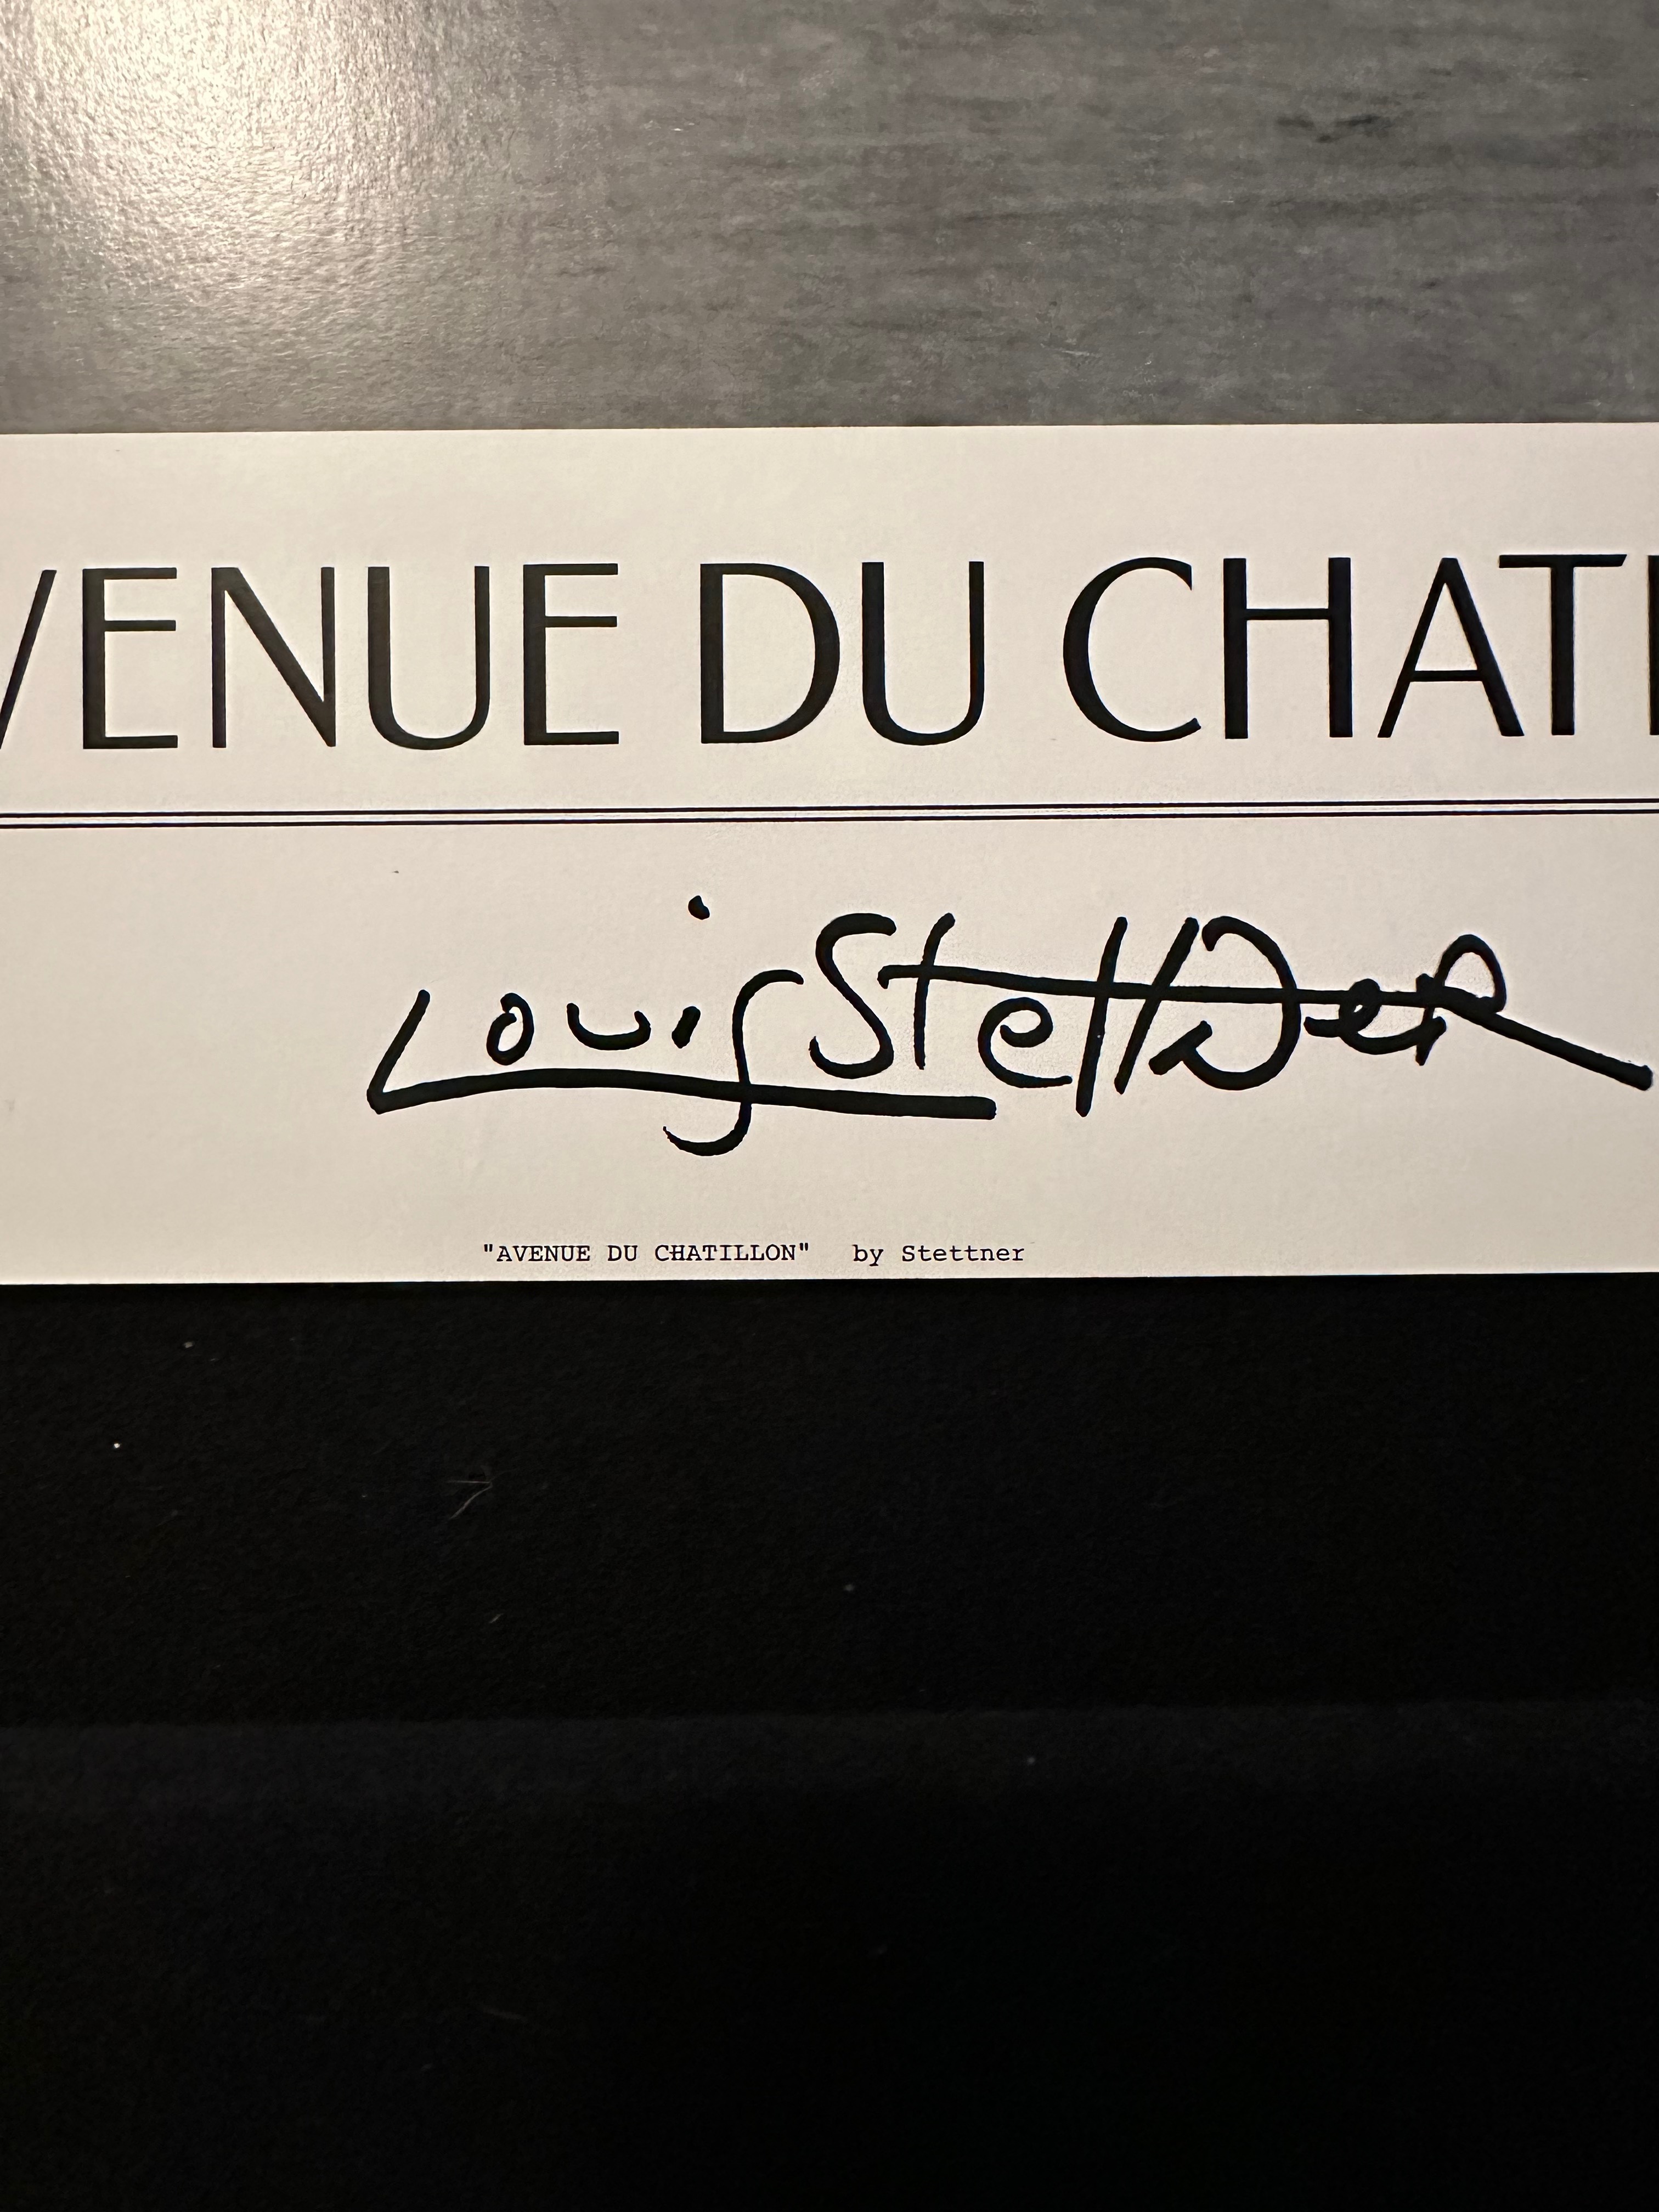 Four x Avenue Du Chatillon By Louis Stettner, 1989 Galaxy of Graphics Ltd, Litho U.S.A. - Image 11 of 16